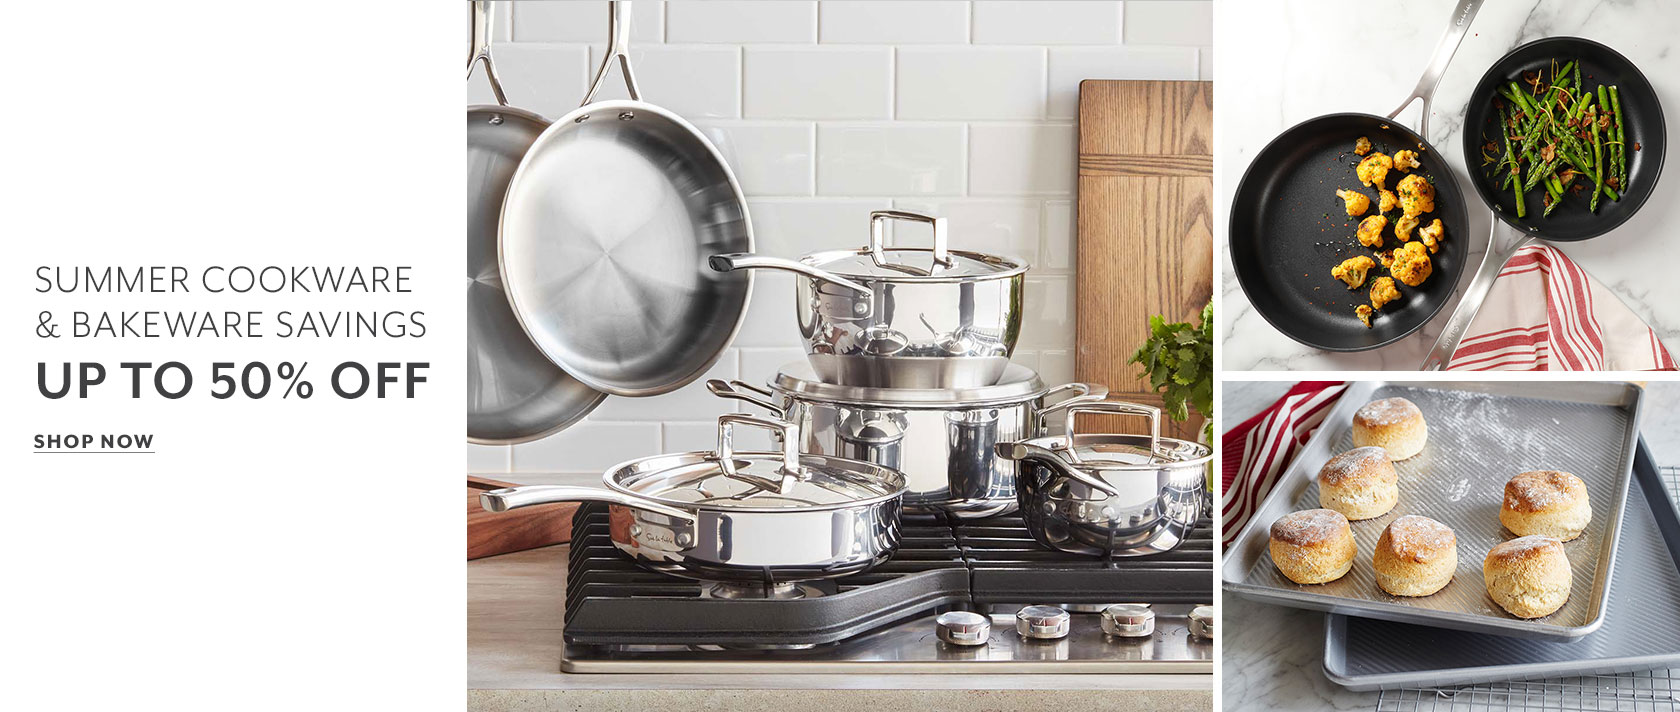 Summer Cookware & Bakeware Savings up to 50% off. Shop Now.